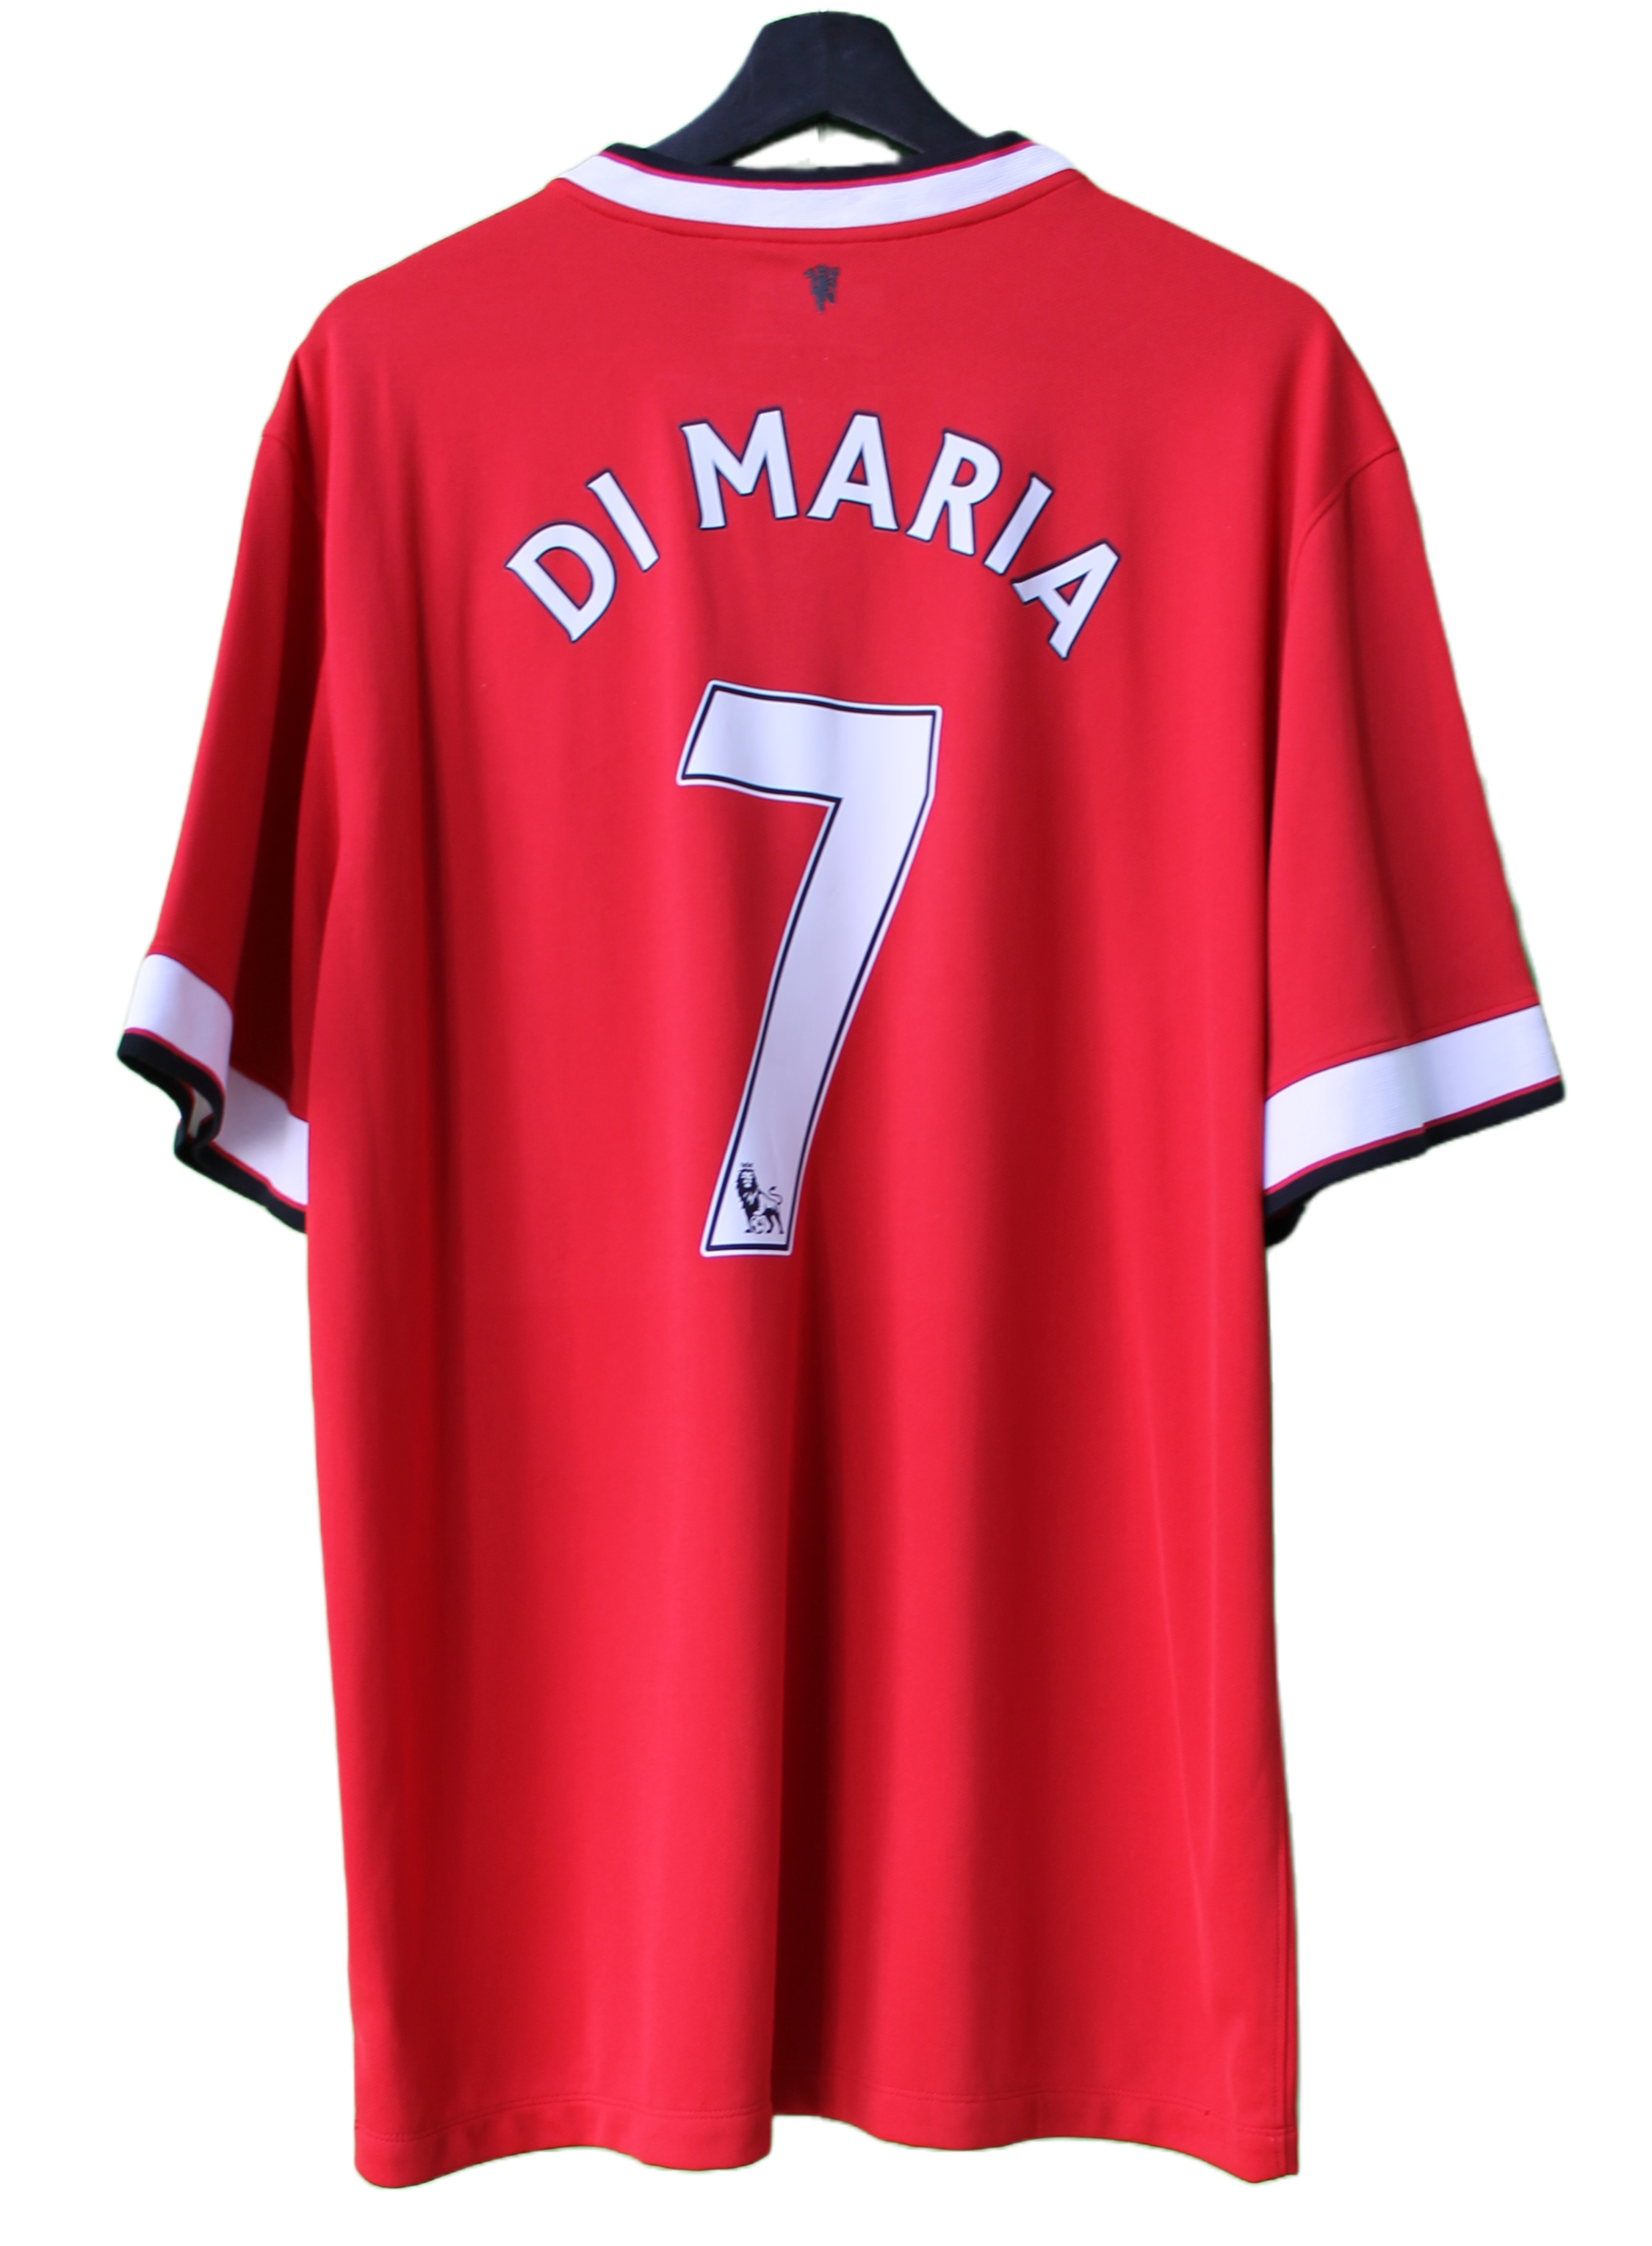 manchester united jersey 14 15